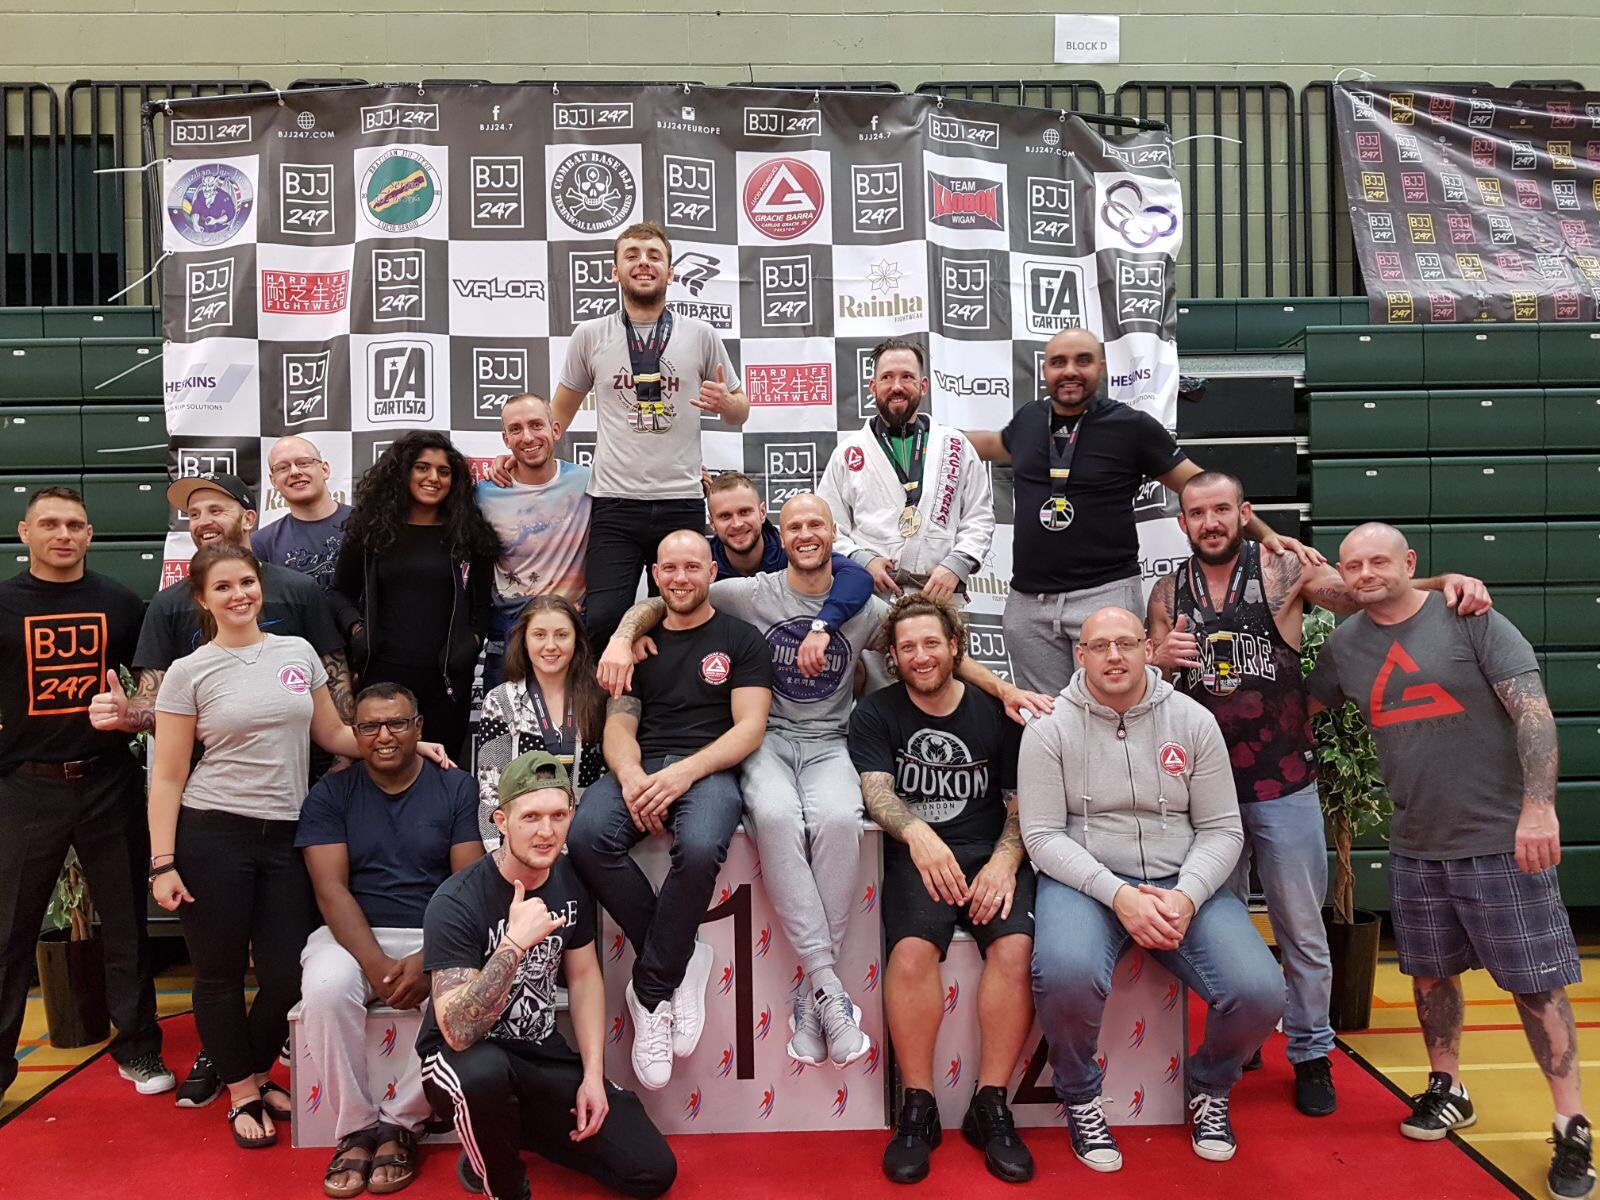 Awesome Sunday funday at the BJJ 24/7 Blackpool!